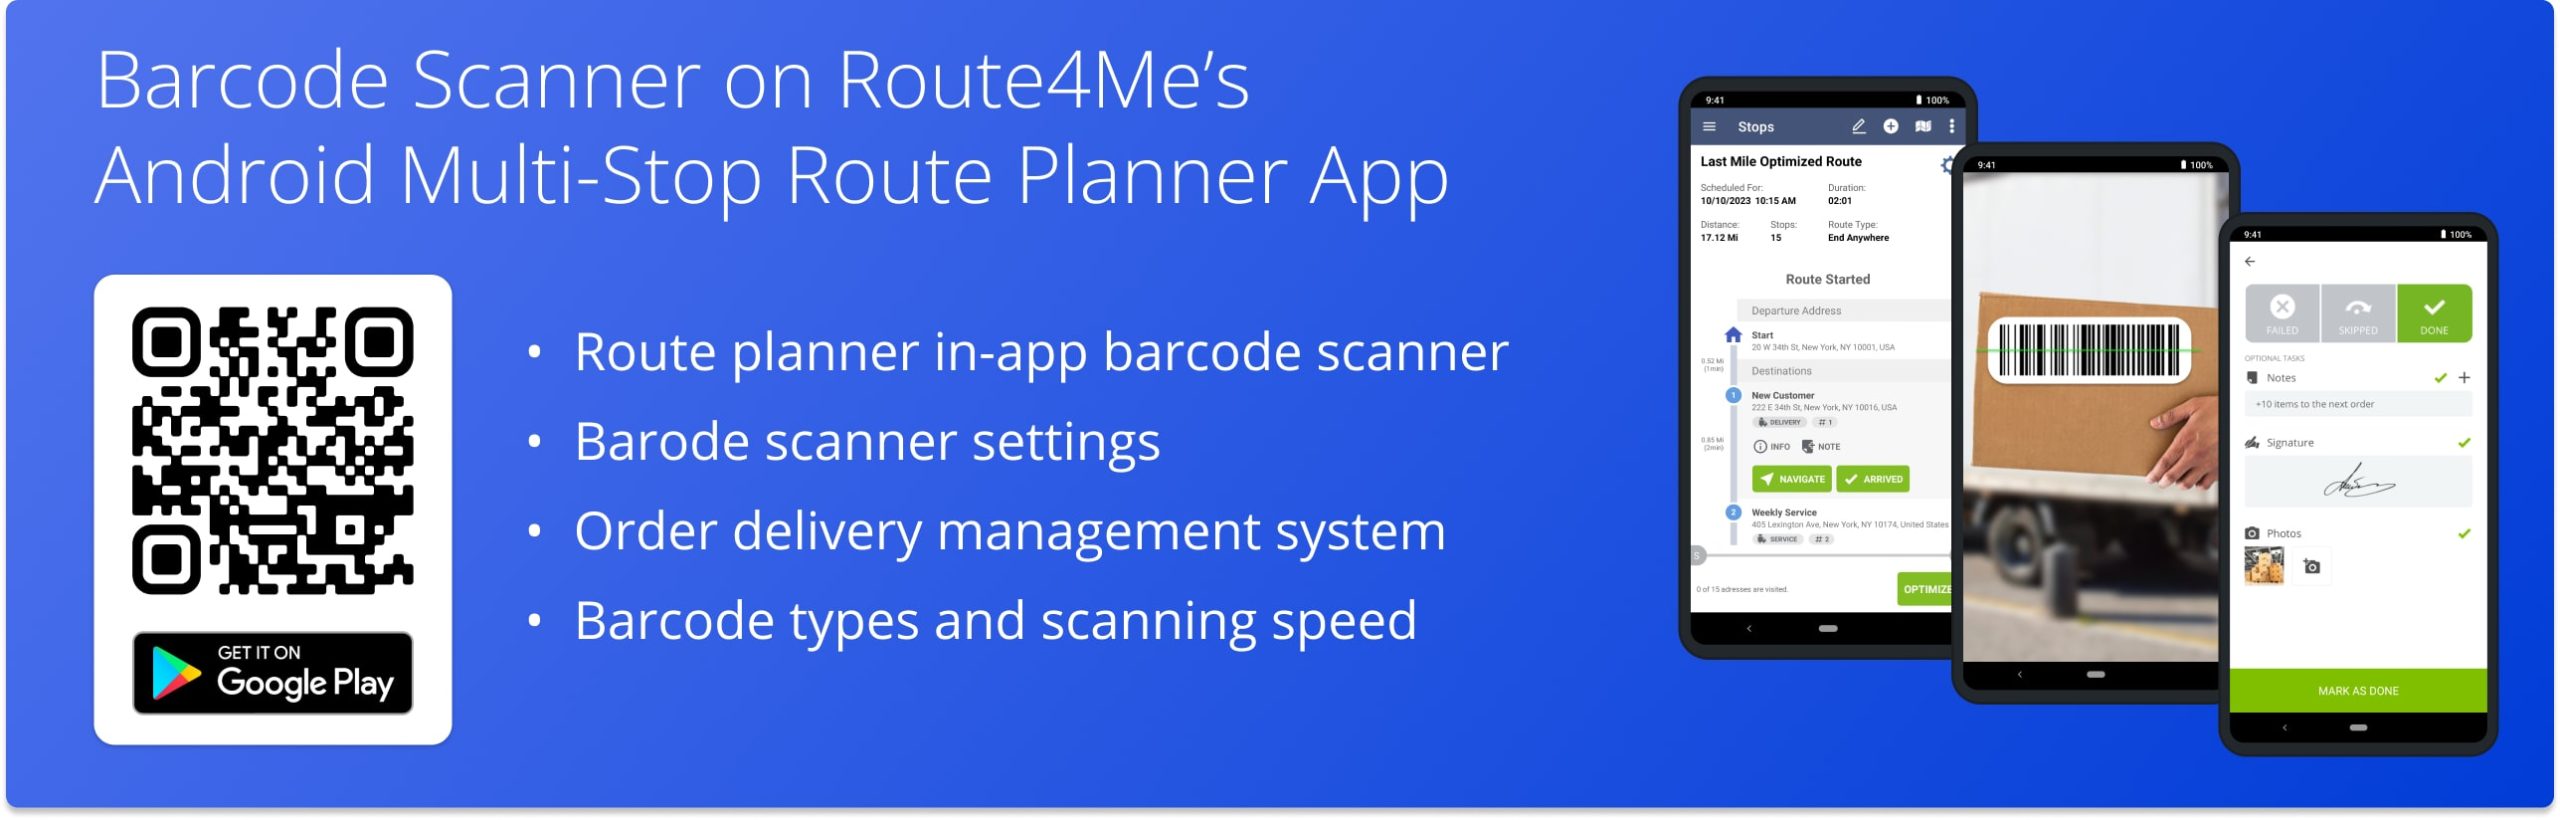 Route4Me Android Route Planner app with integrated barcode scanner for attaching data to route stops.